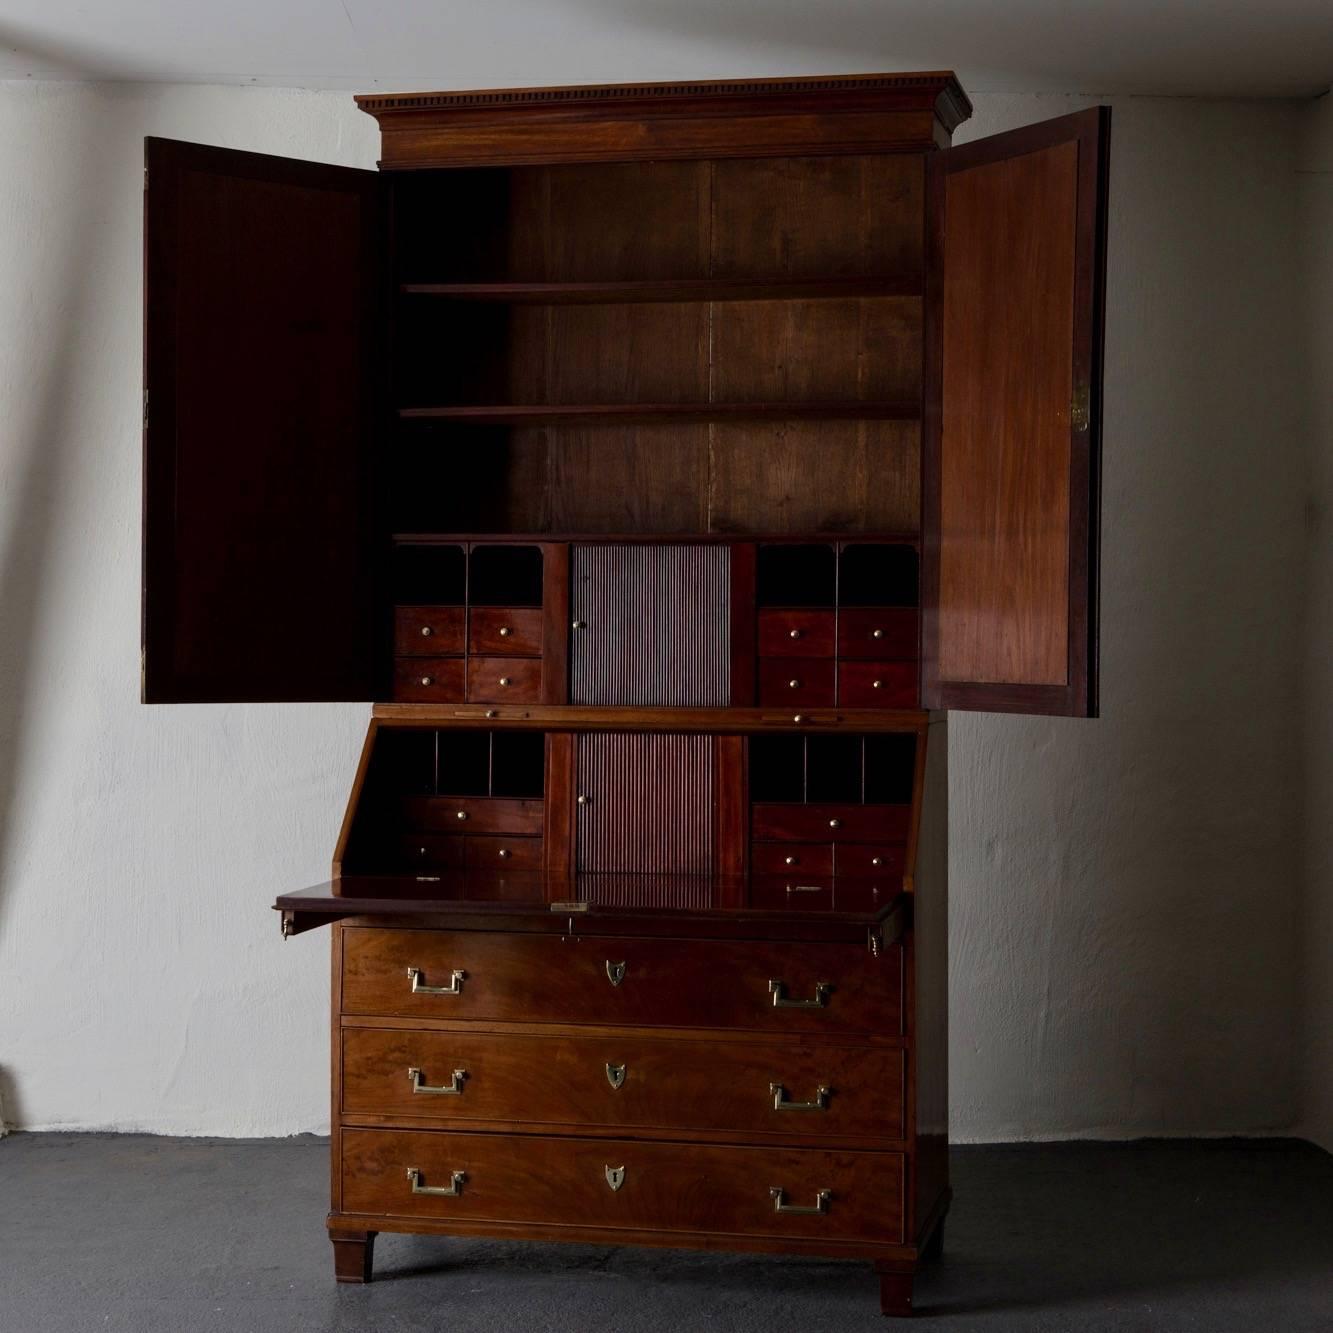 A secretary made during the 18th century in Sweden. The pieces is a so called master piece that made by Carl Frick to this craftsmanship diploma. Its made in a beautiful mahogany with stunning details such as a parquetted flooring in the mid